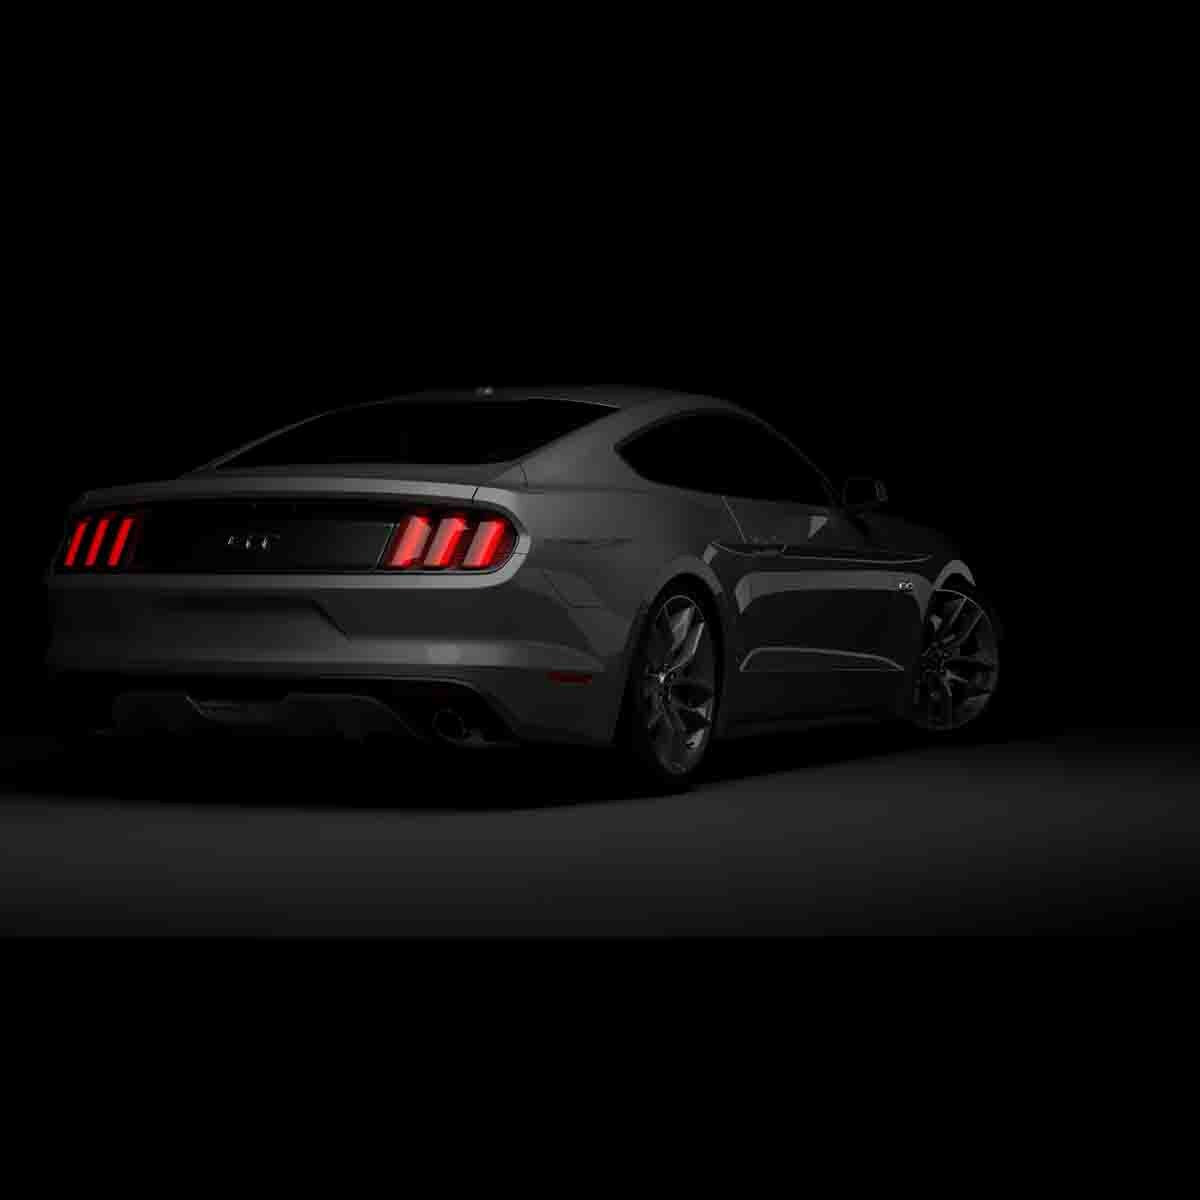 Ford Mustang V8 5.0L. Luxury Stylish Grey Car on Black Background Wallpaper Teen Bedroom Mural